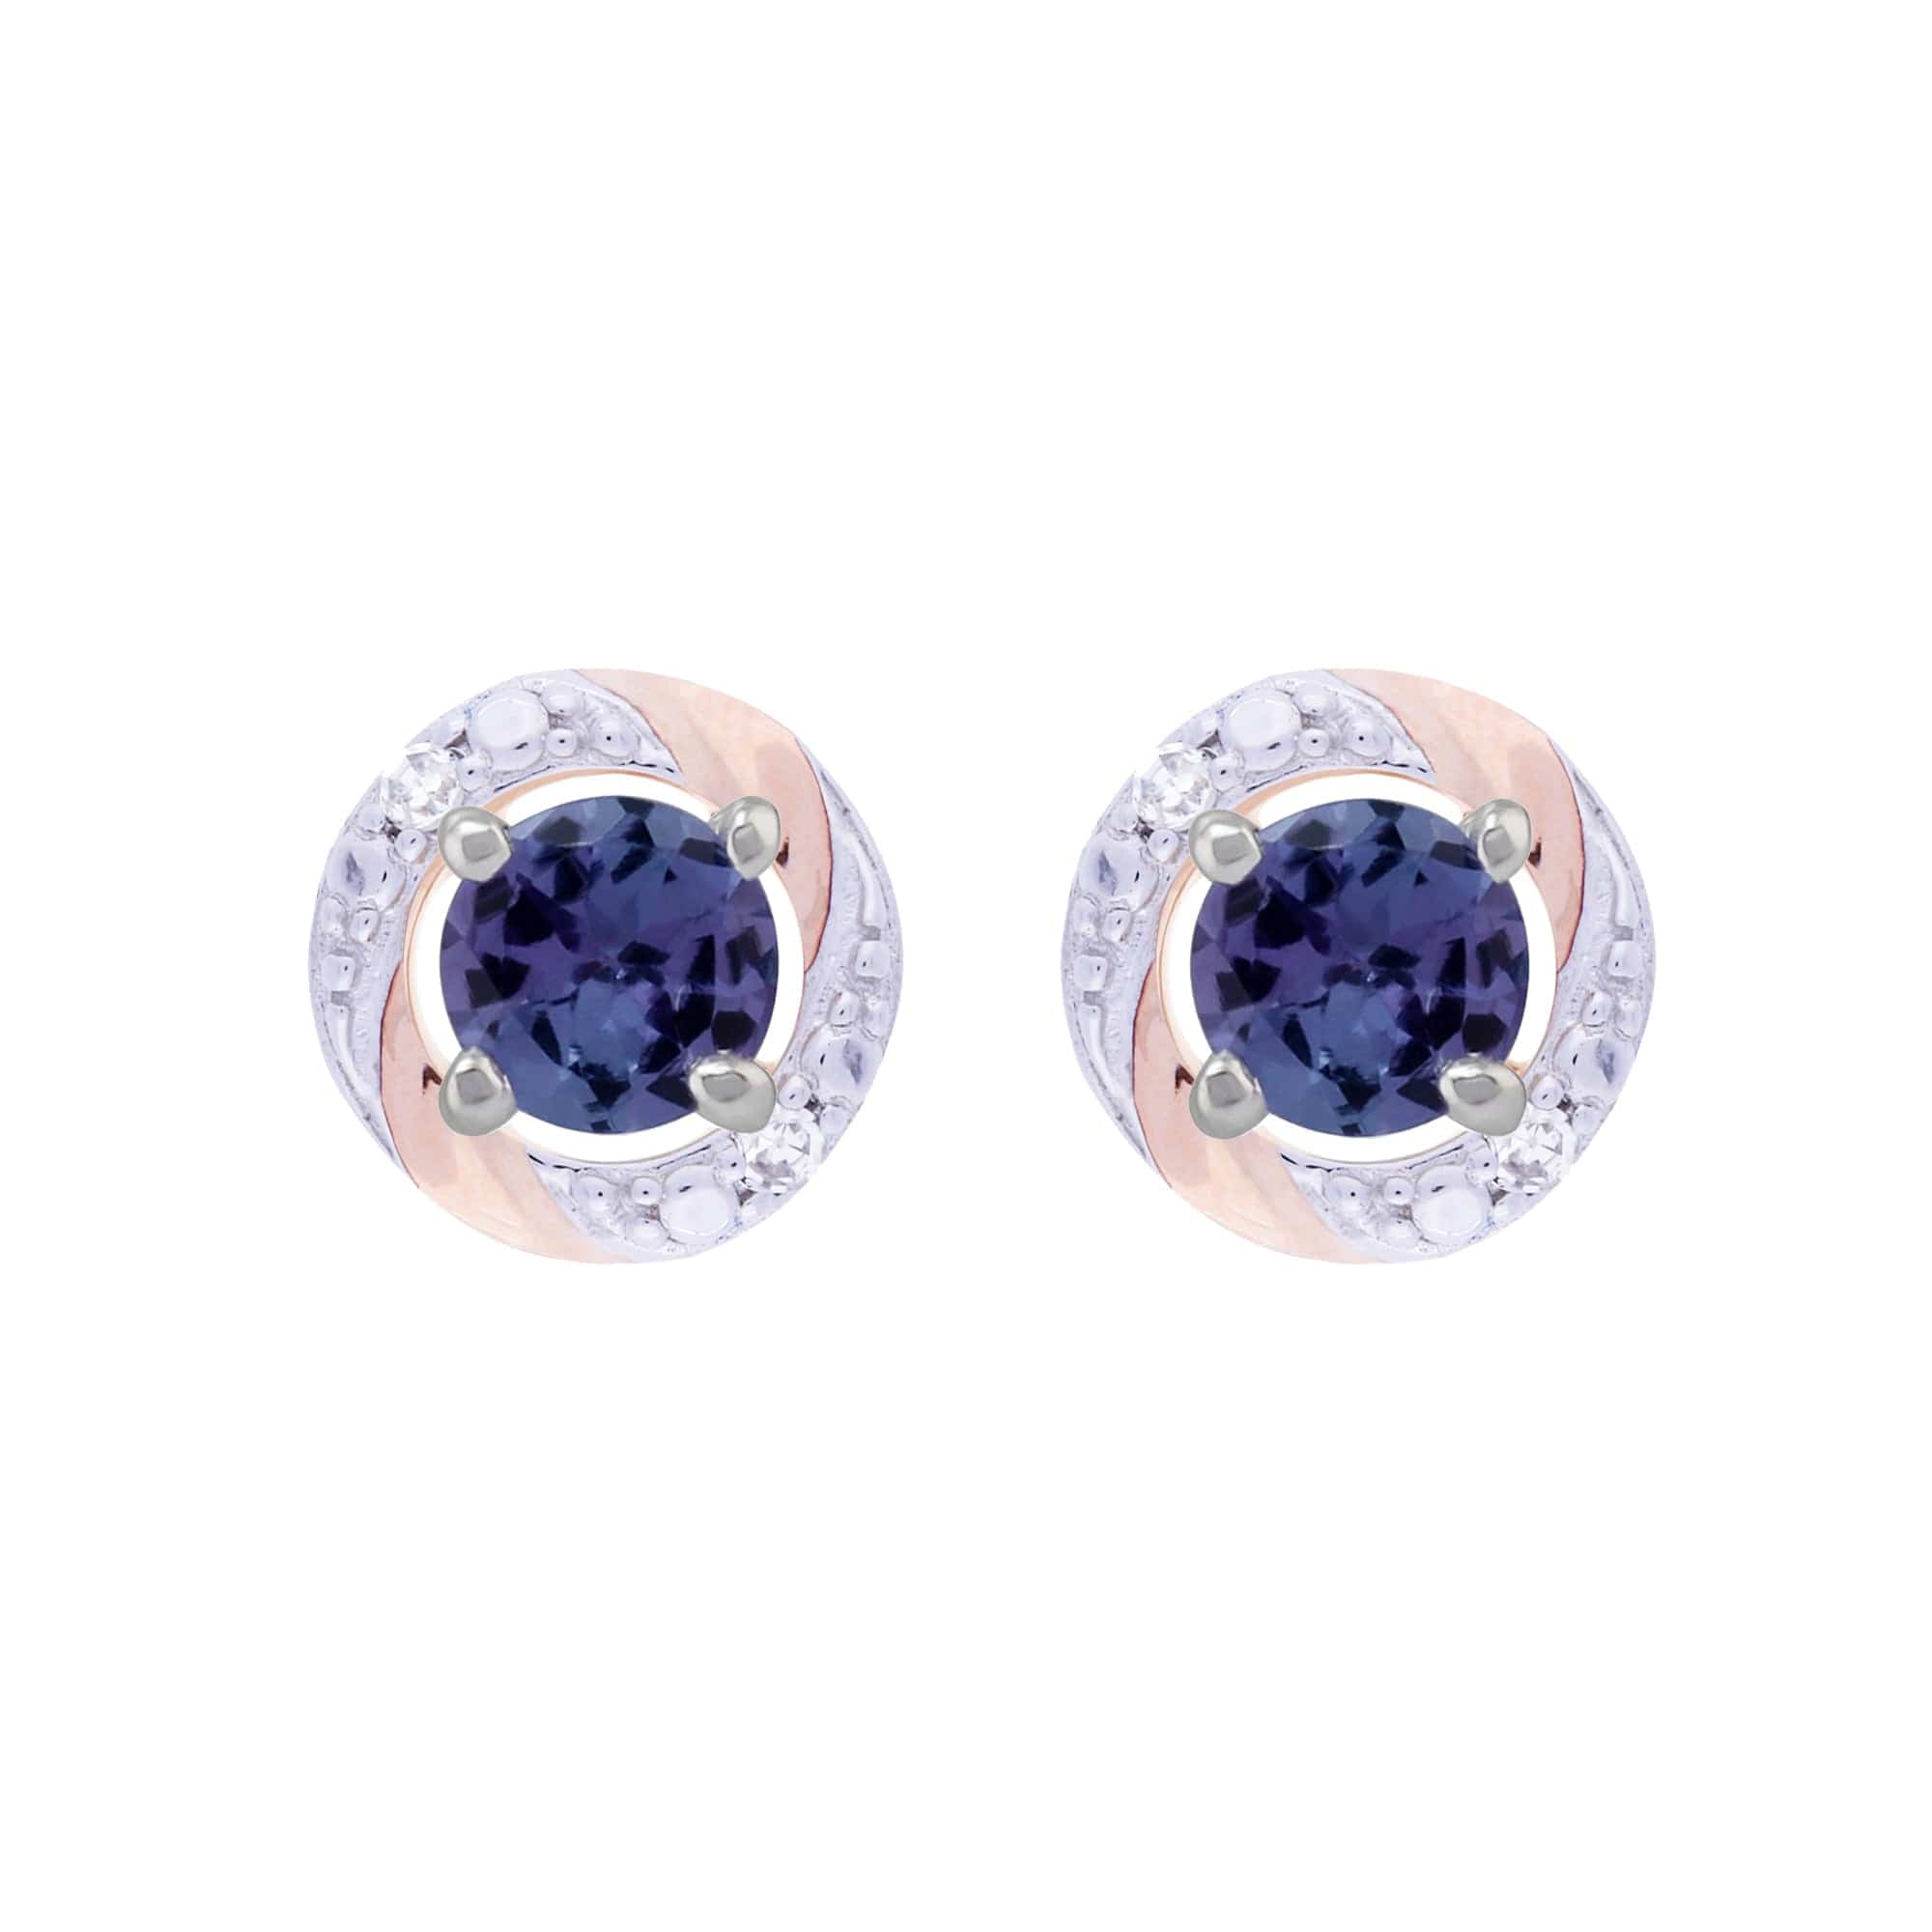 18937-191E0378019 Classic Round Tanzanite Stud Earrings with Detachable Diamond Round Earrings Jacket Set in 9ct White Gold 1